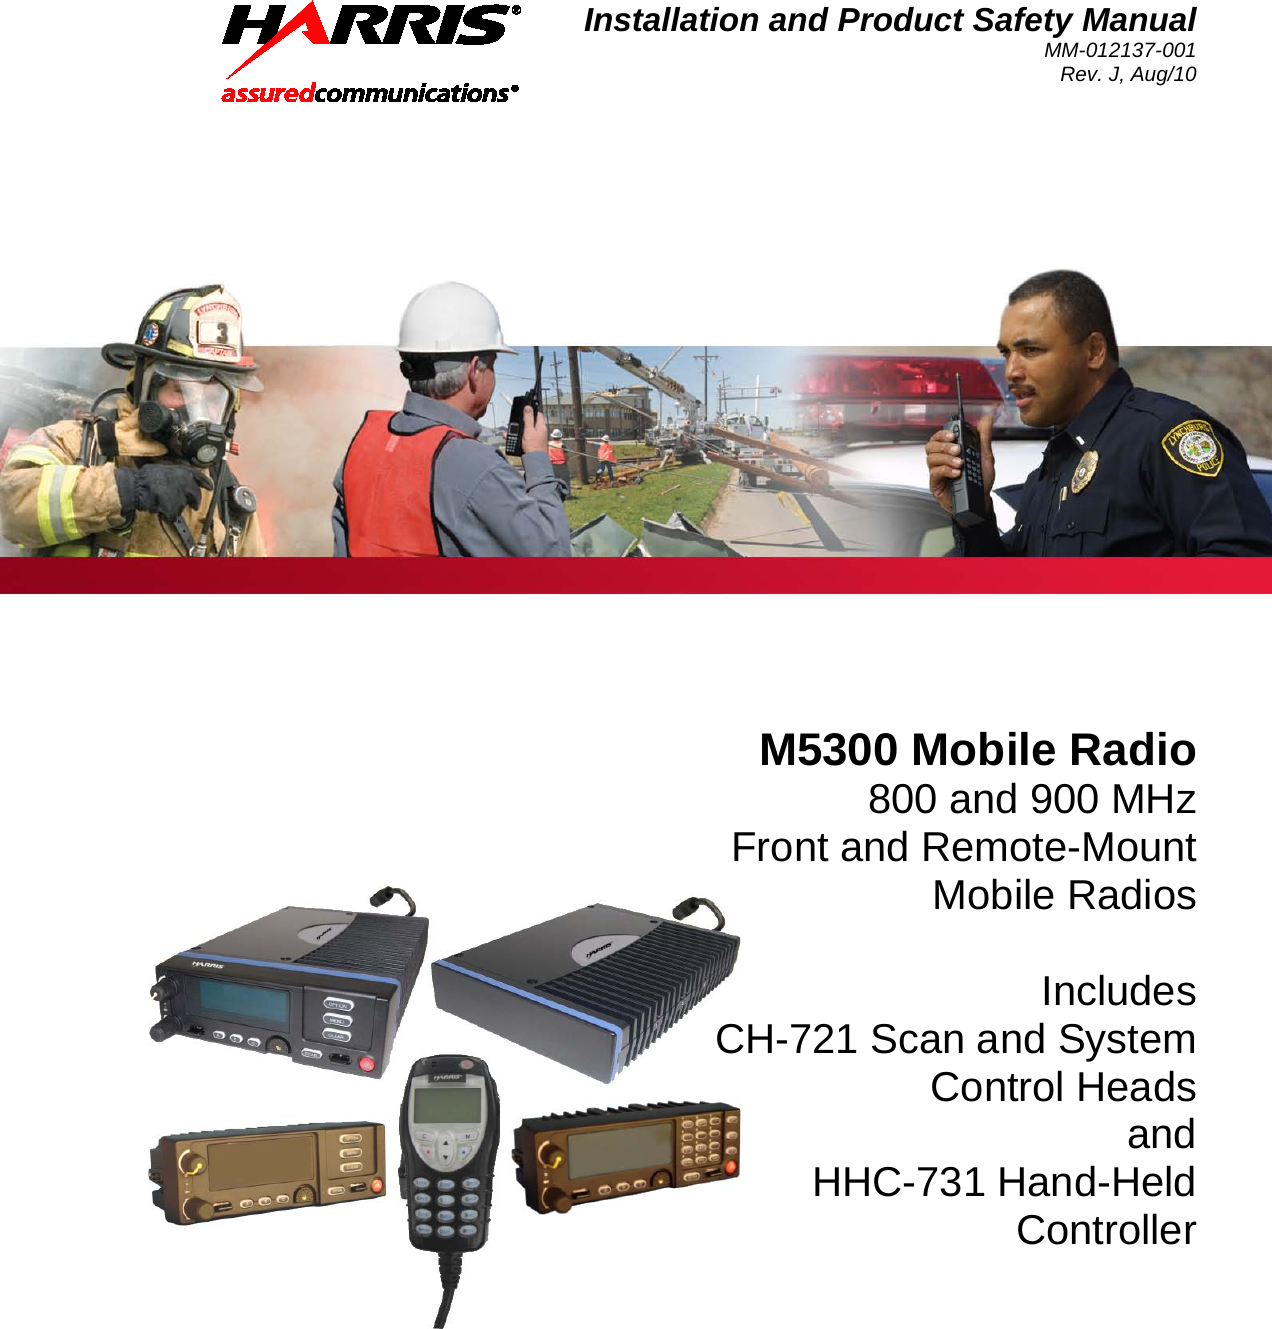 Installation and Product Safety Manual MM-012137-001 Rev. J, Aug/10   M5300 Mobile Radio 800 and 900 MHz Front and Remote-Mount Mobile Radios  Includes CH-721 Scan and System Control Heads and HHC-731 Hand-Held Controller  